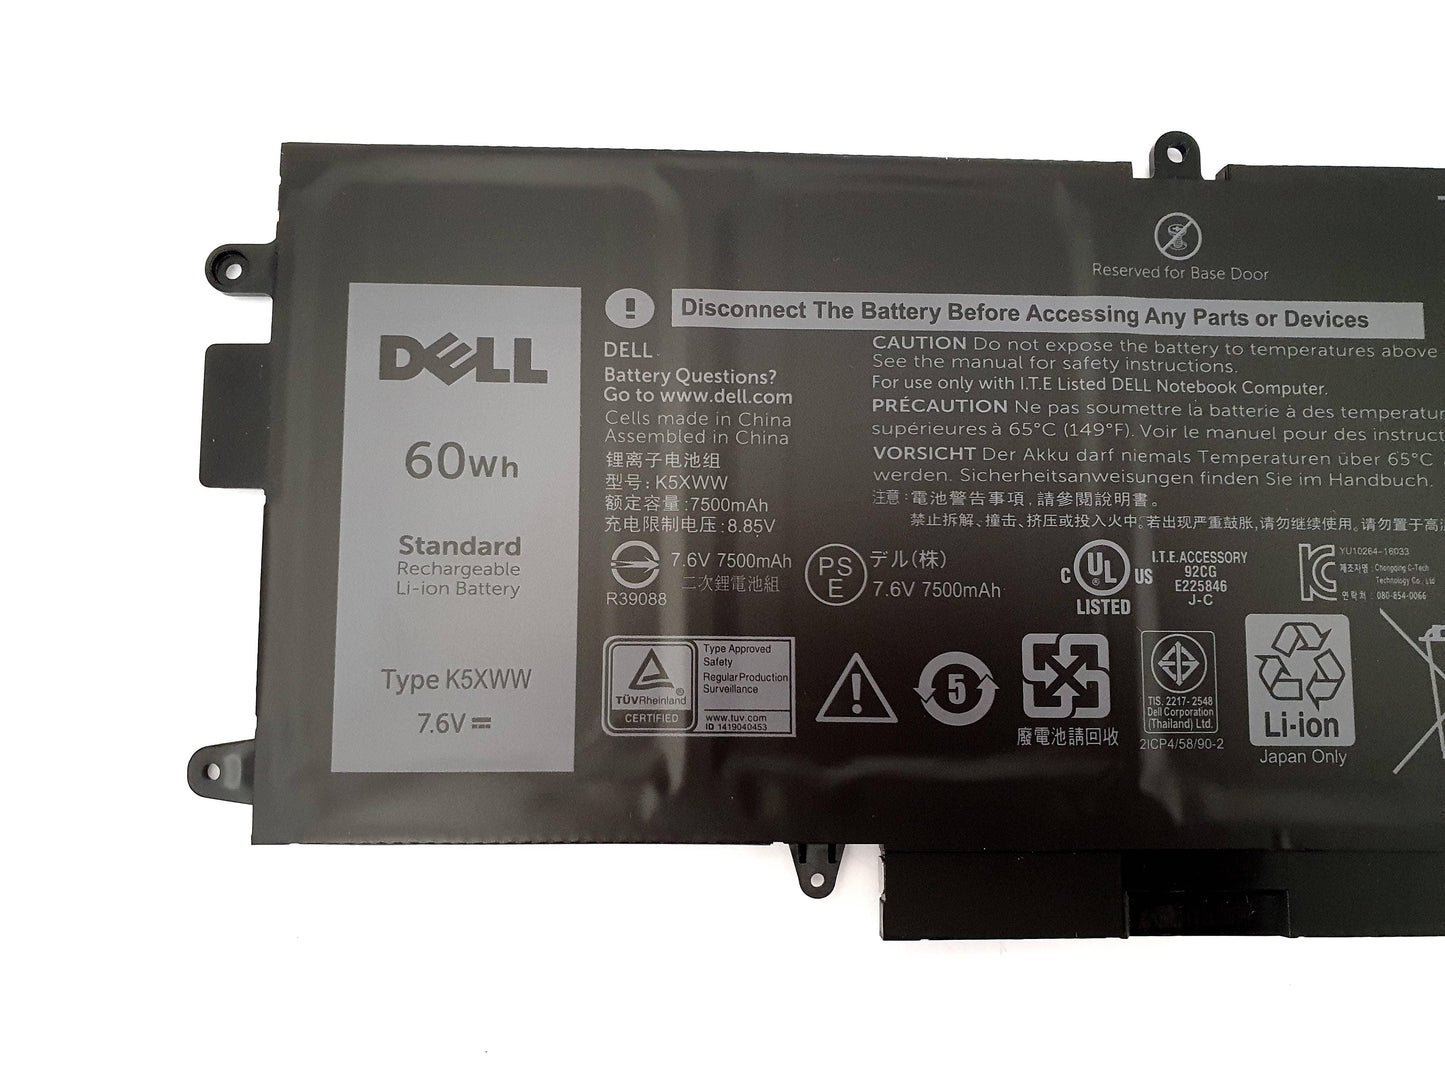 Dell Latitude 5289 2-in-1 4 Cell 60Wh Battery N18GG 725KY 6CYH6 K5XWW | Black Cat PC